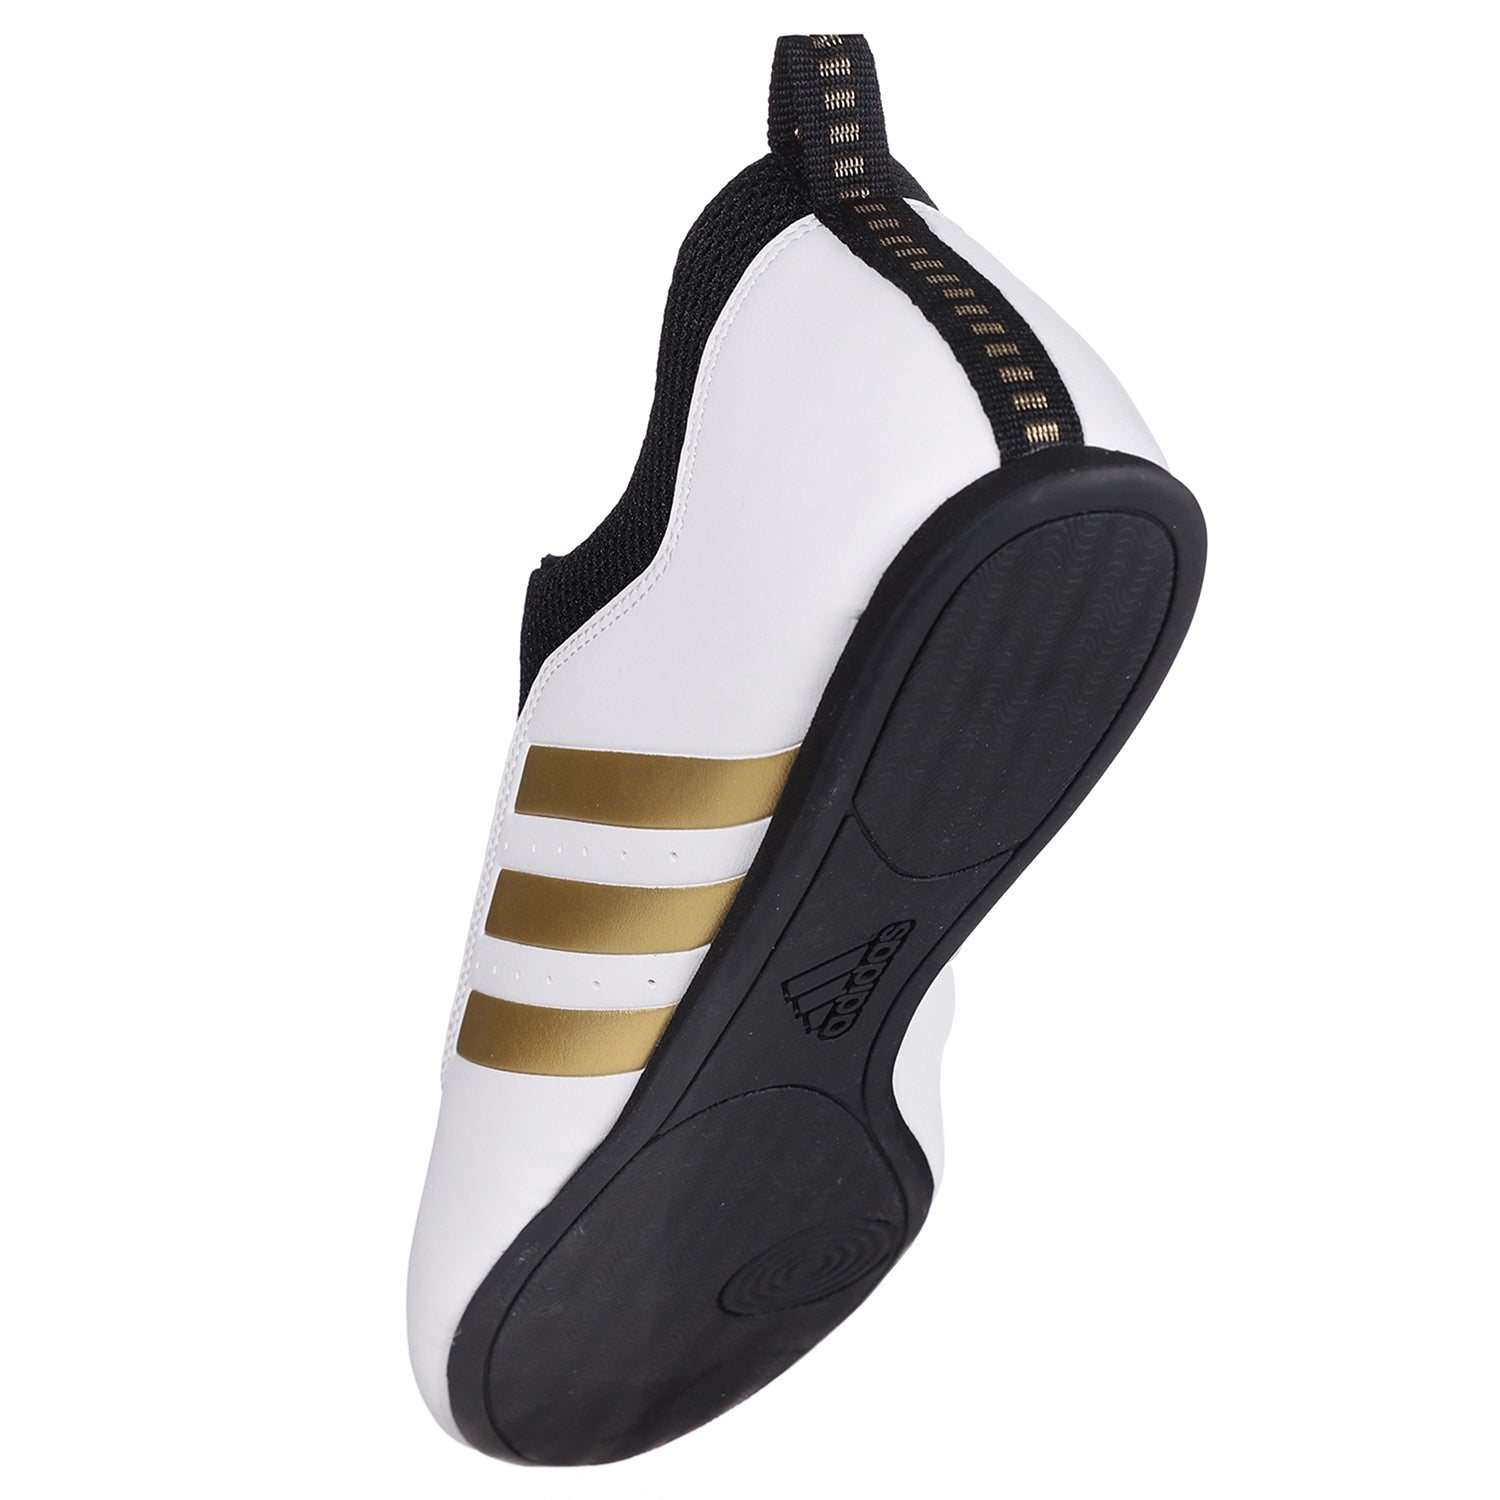 ALL NEW! adidas Contestant-Pro Shoe